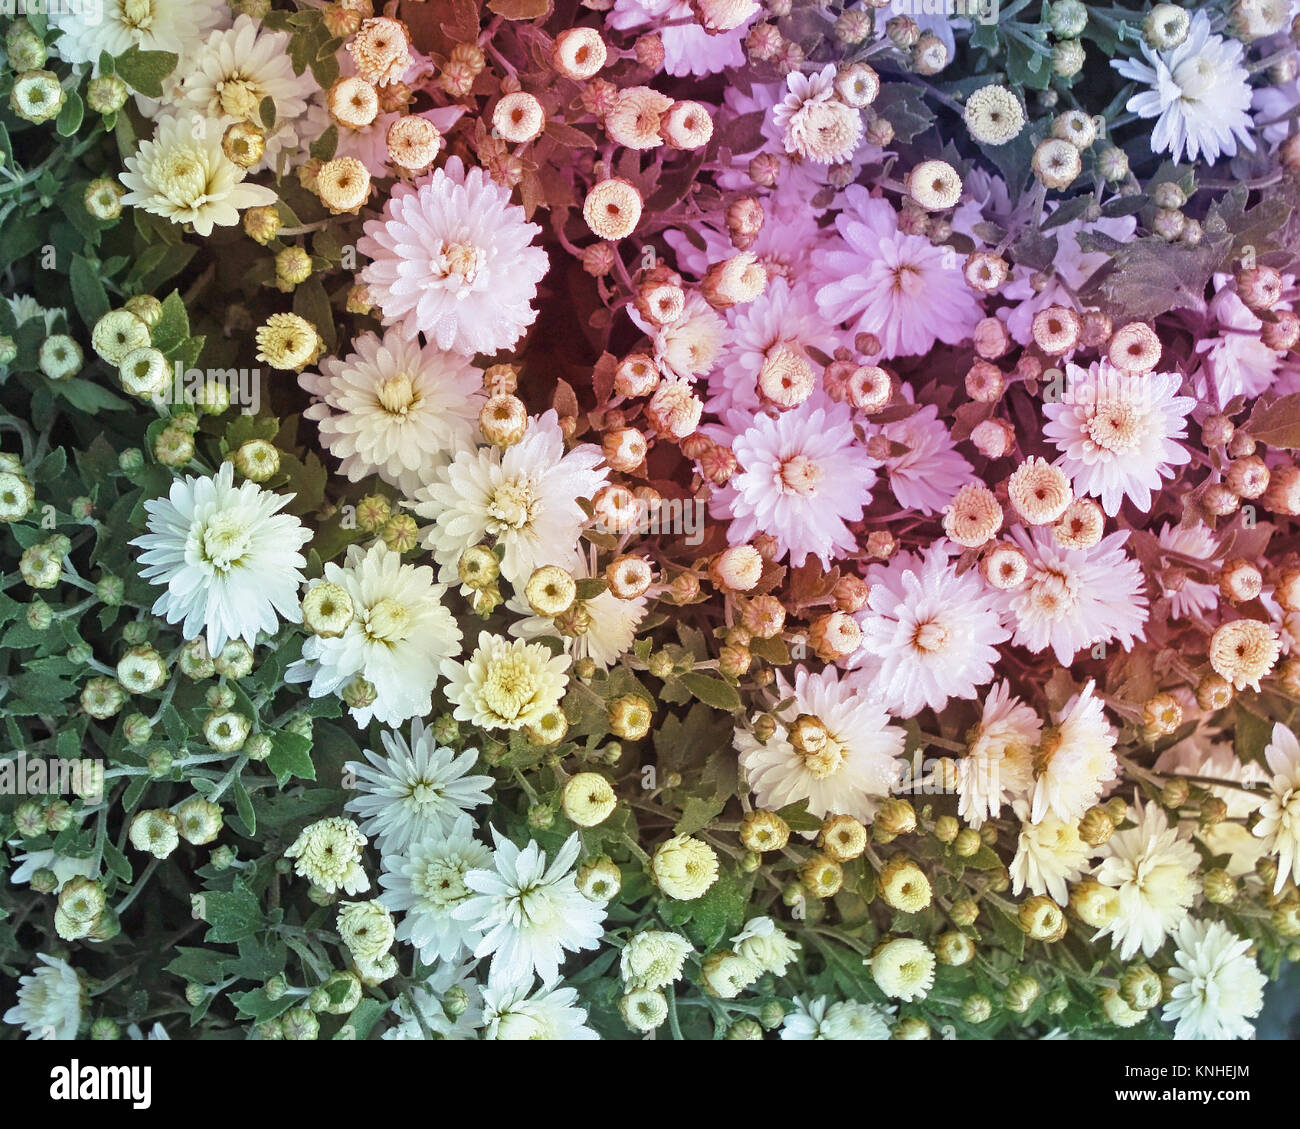 Tiny Chrysanthemum flowers create a beautiful background with a tint of added rainbow colors Stock Photo